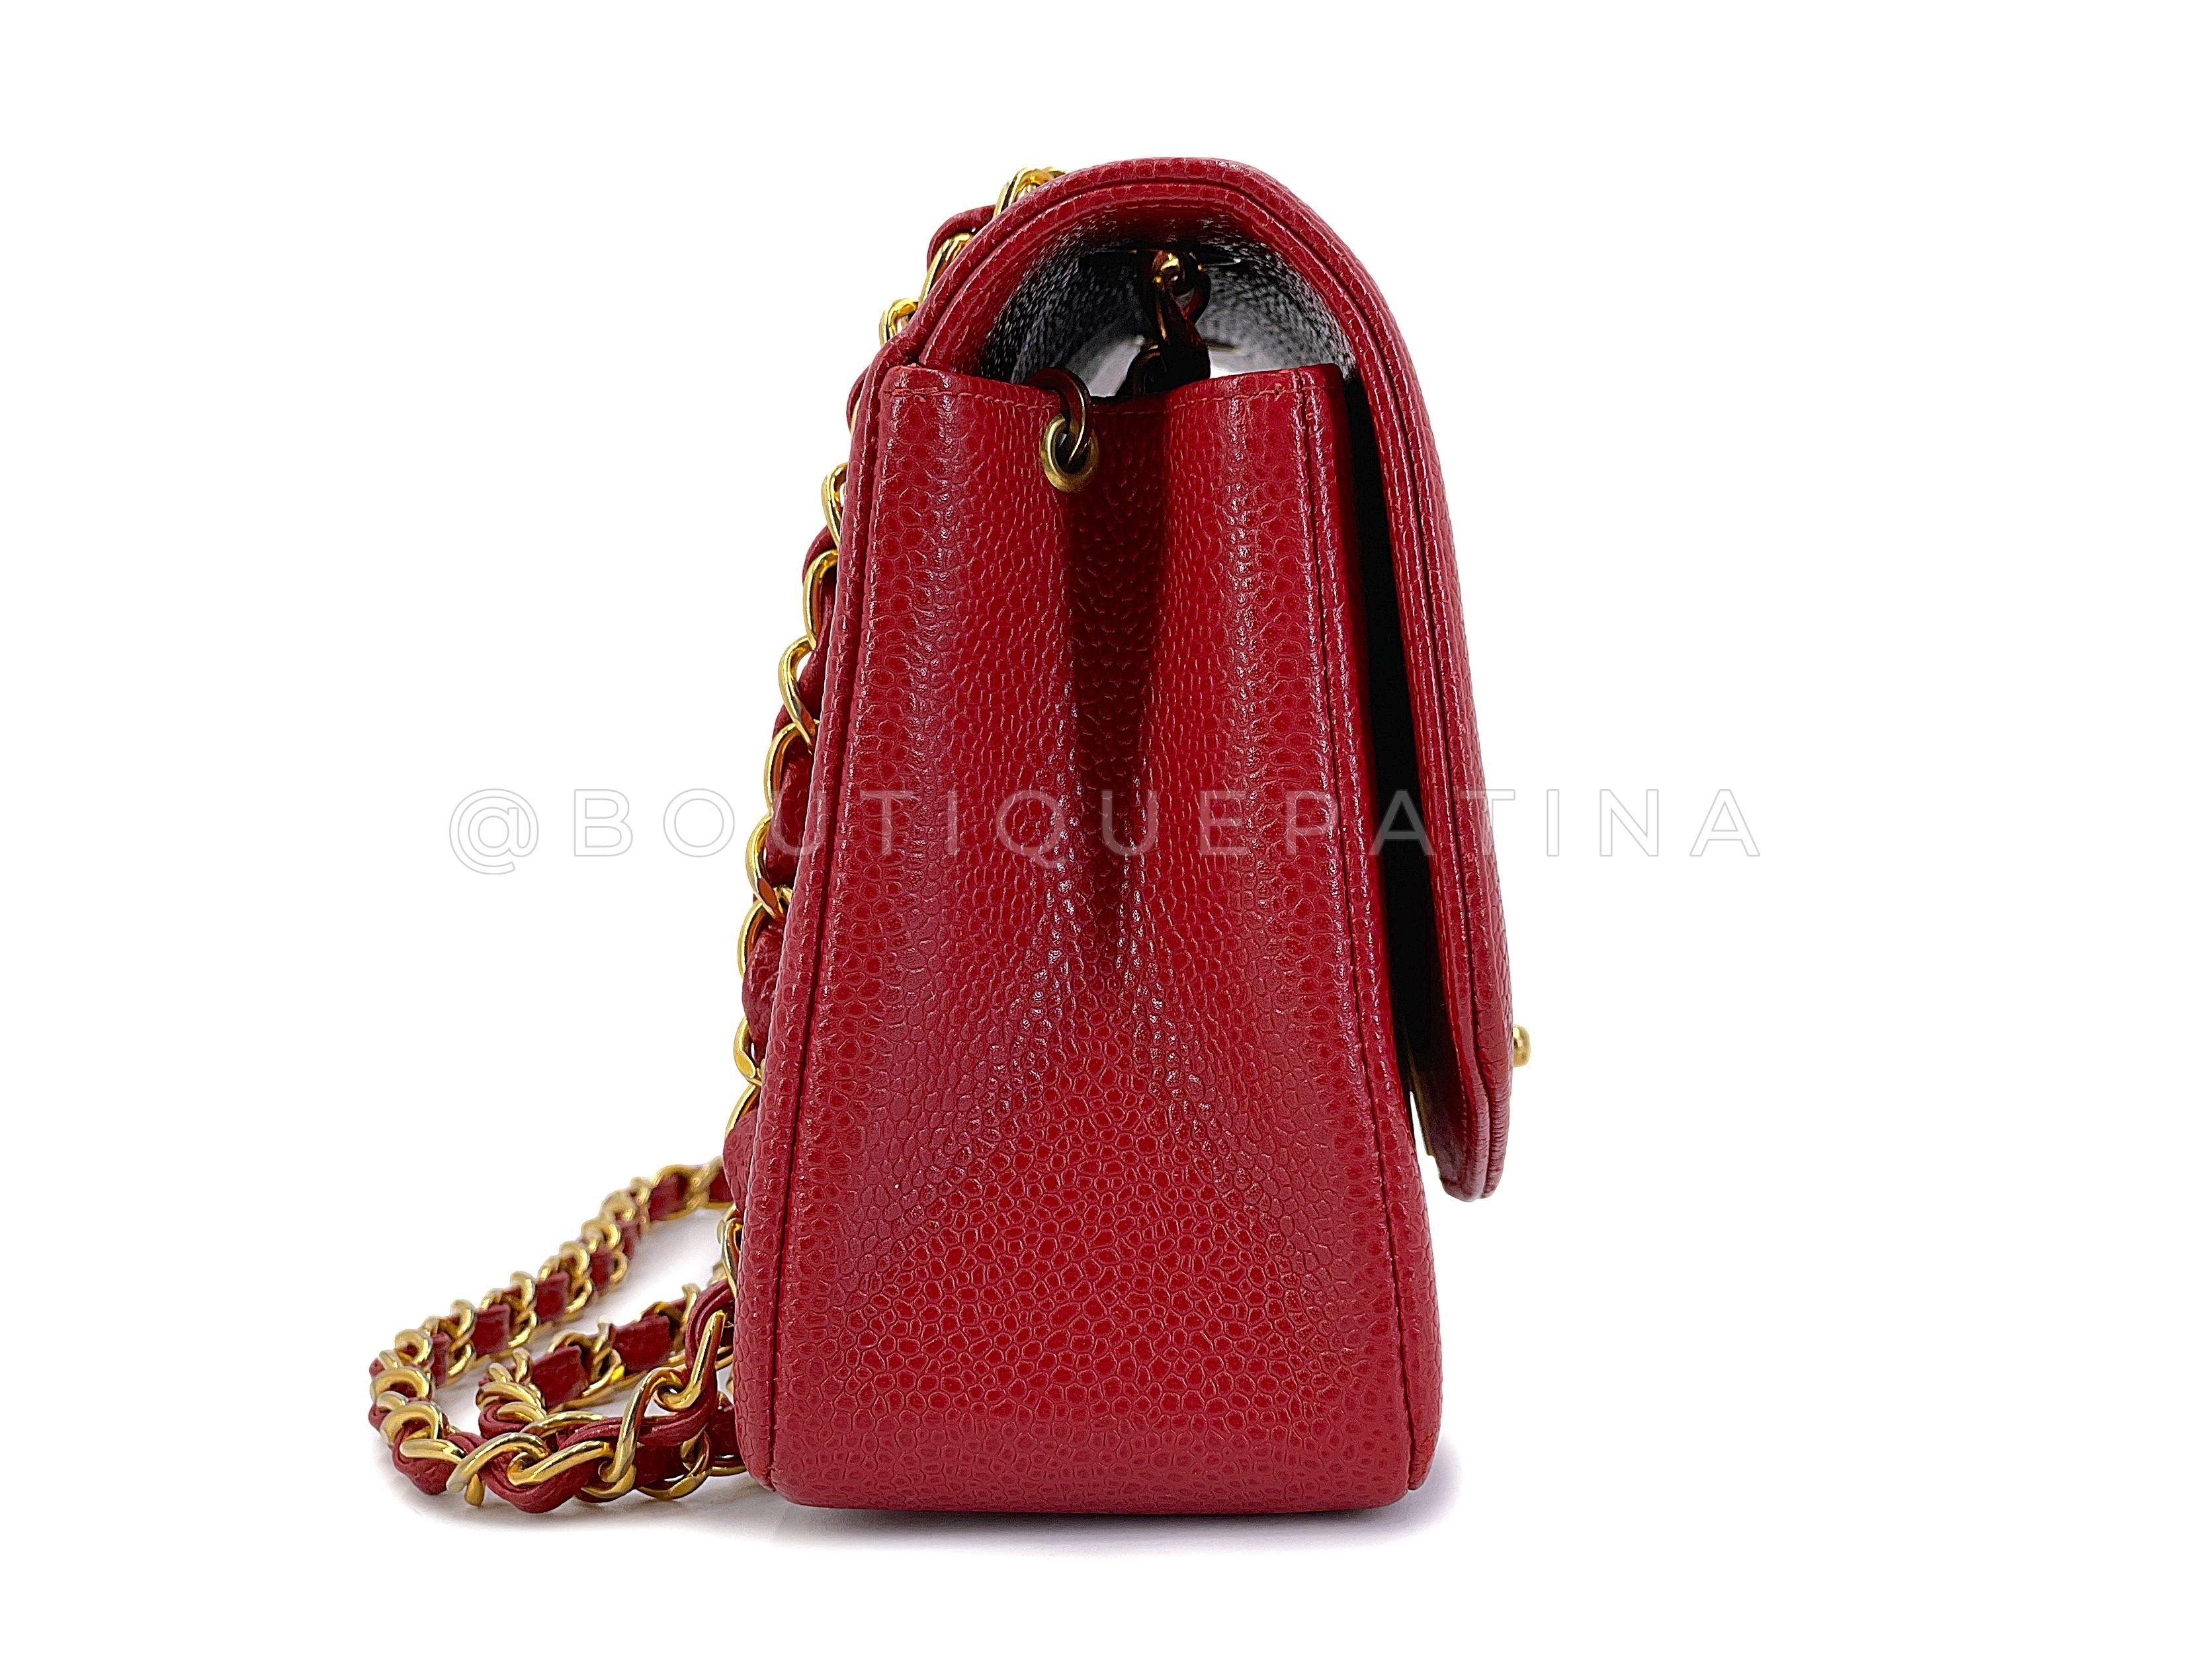 Women's Chanel Vintage Red Caviar Small Diana Flap Bag 24k GHW 67655 For Sale